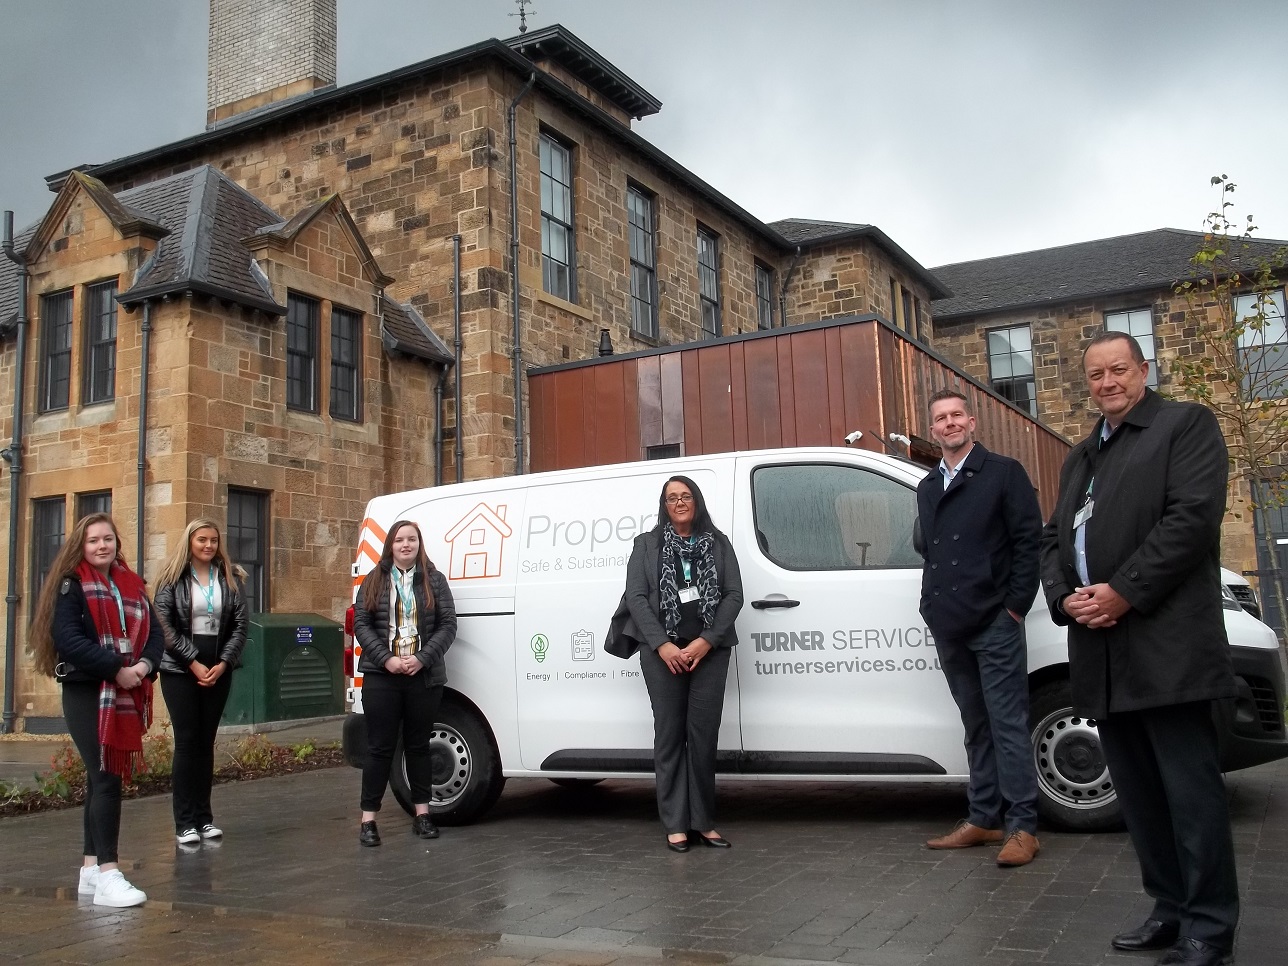 Turner Services teams up with housing association to provide employment boost for young workers